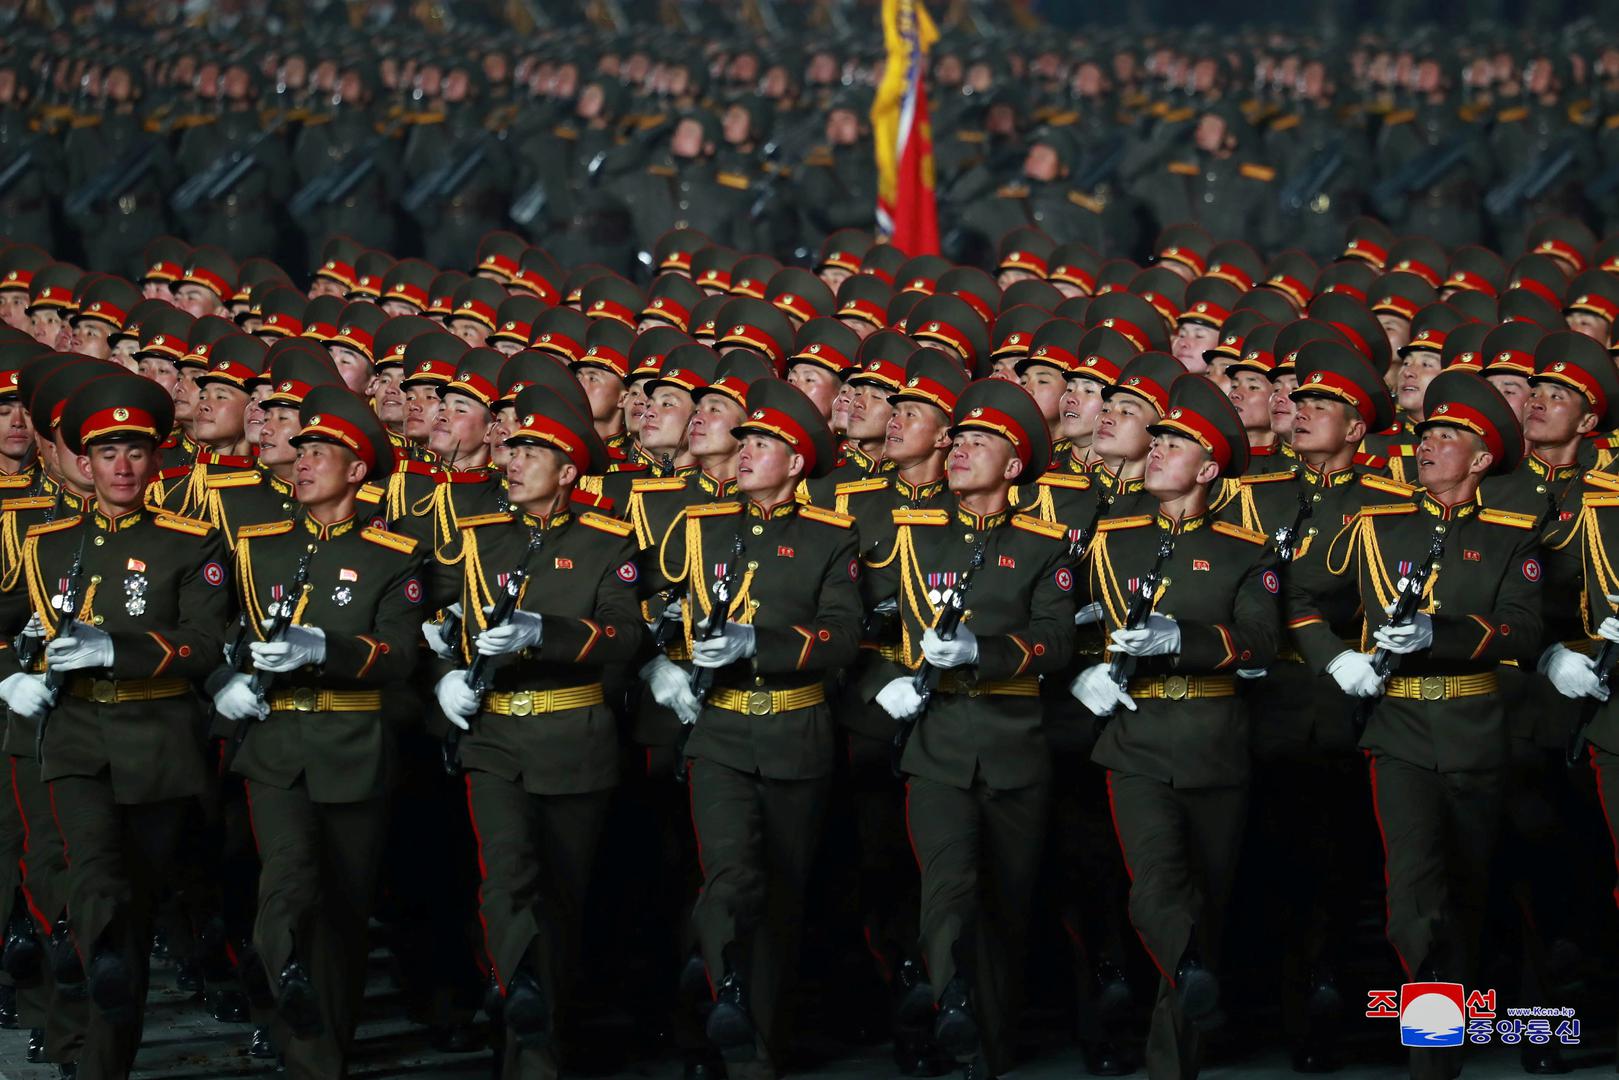 8th Congress of the Workers' Party in Pyongyang Troops march during a military parade to commemorate the 8th Congress of the Workers' Party in Pyongyang, North Korea January 14, 2021 in this photo supplied by North Korea's Central News Agency (KCNA).    KCNA via REUTERS    ATTENTION EDITORS - THIS IMAGE WAS PROVIDED BY A THIRD PARTY. REUTERS IS UNABLE TO INDEPENDENTLY VERIFY THIS IMAGE. NO THIRD PARTY SALES. SOUTH KOREA OUT. NO COMMERCIAL OR EDITORIAL SALES IN SOUTH KOREA. REFILE - CORRECTING CAPTION DESCRIPTION KCNA